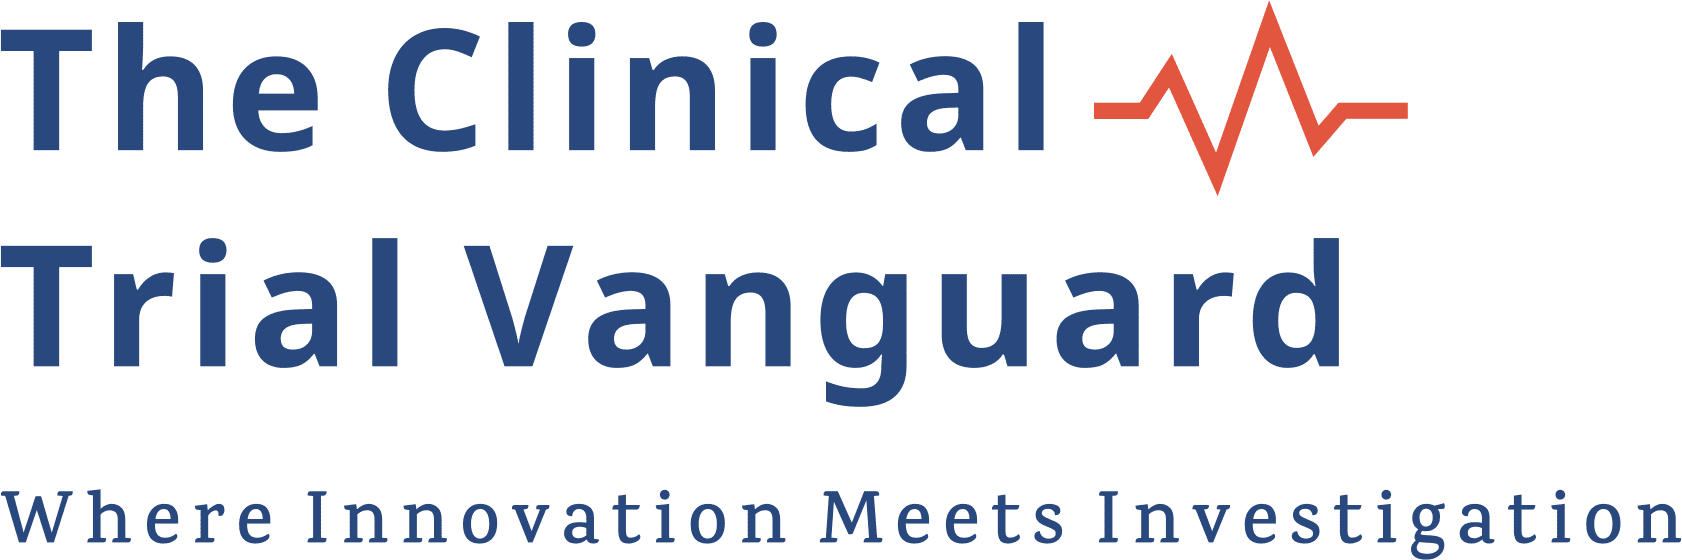 Logo of The Clinical Trial Vanguard